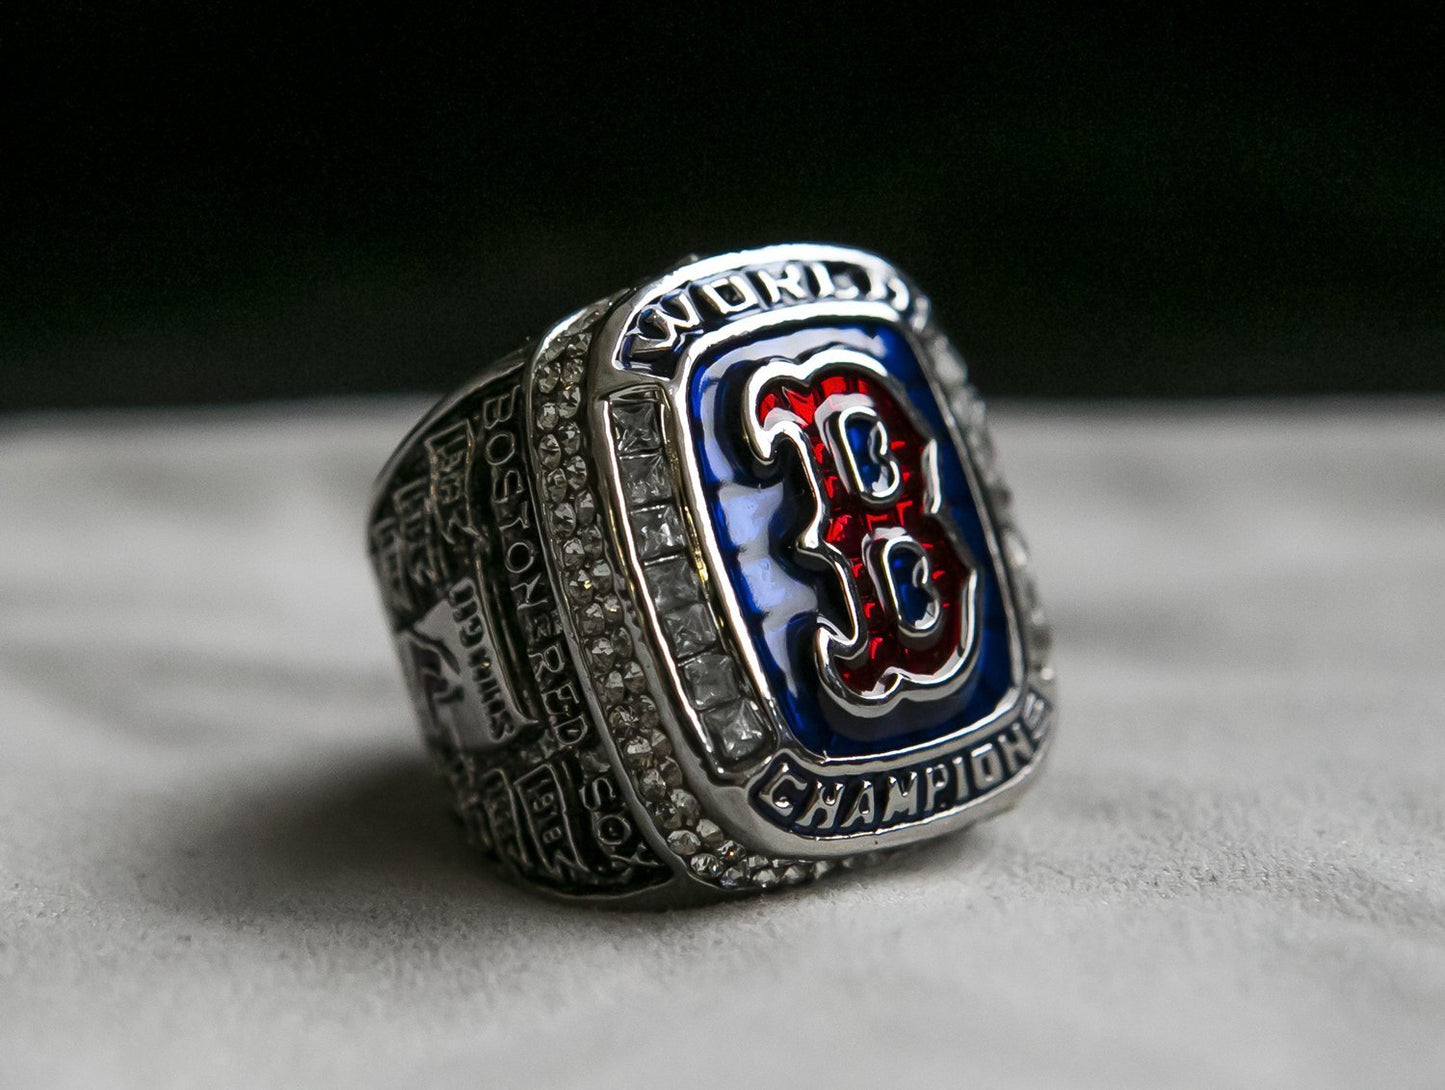 Boston Red Sox World Series Rings (2018) - Rings For Champs, NFL rings, MLB rings, NBA rings, NHL rings, NCAA rings, Super bowl ring, Superbowl ring, Super bowl rings, Superbowl rings, Dallas Cowboys